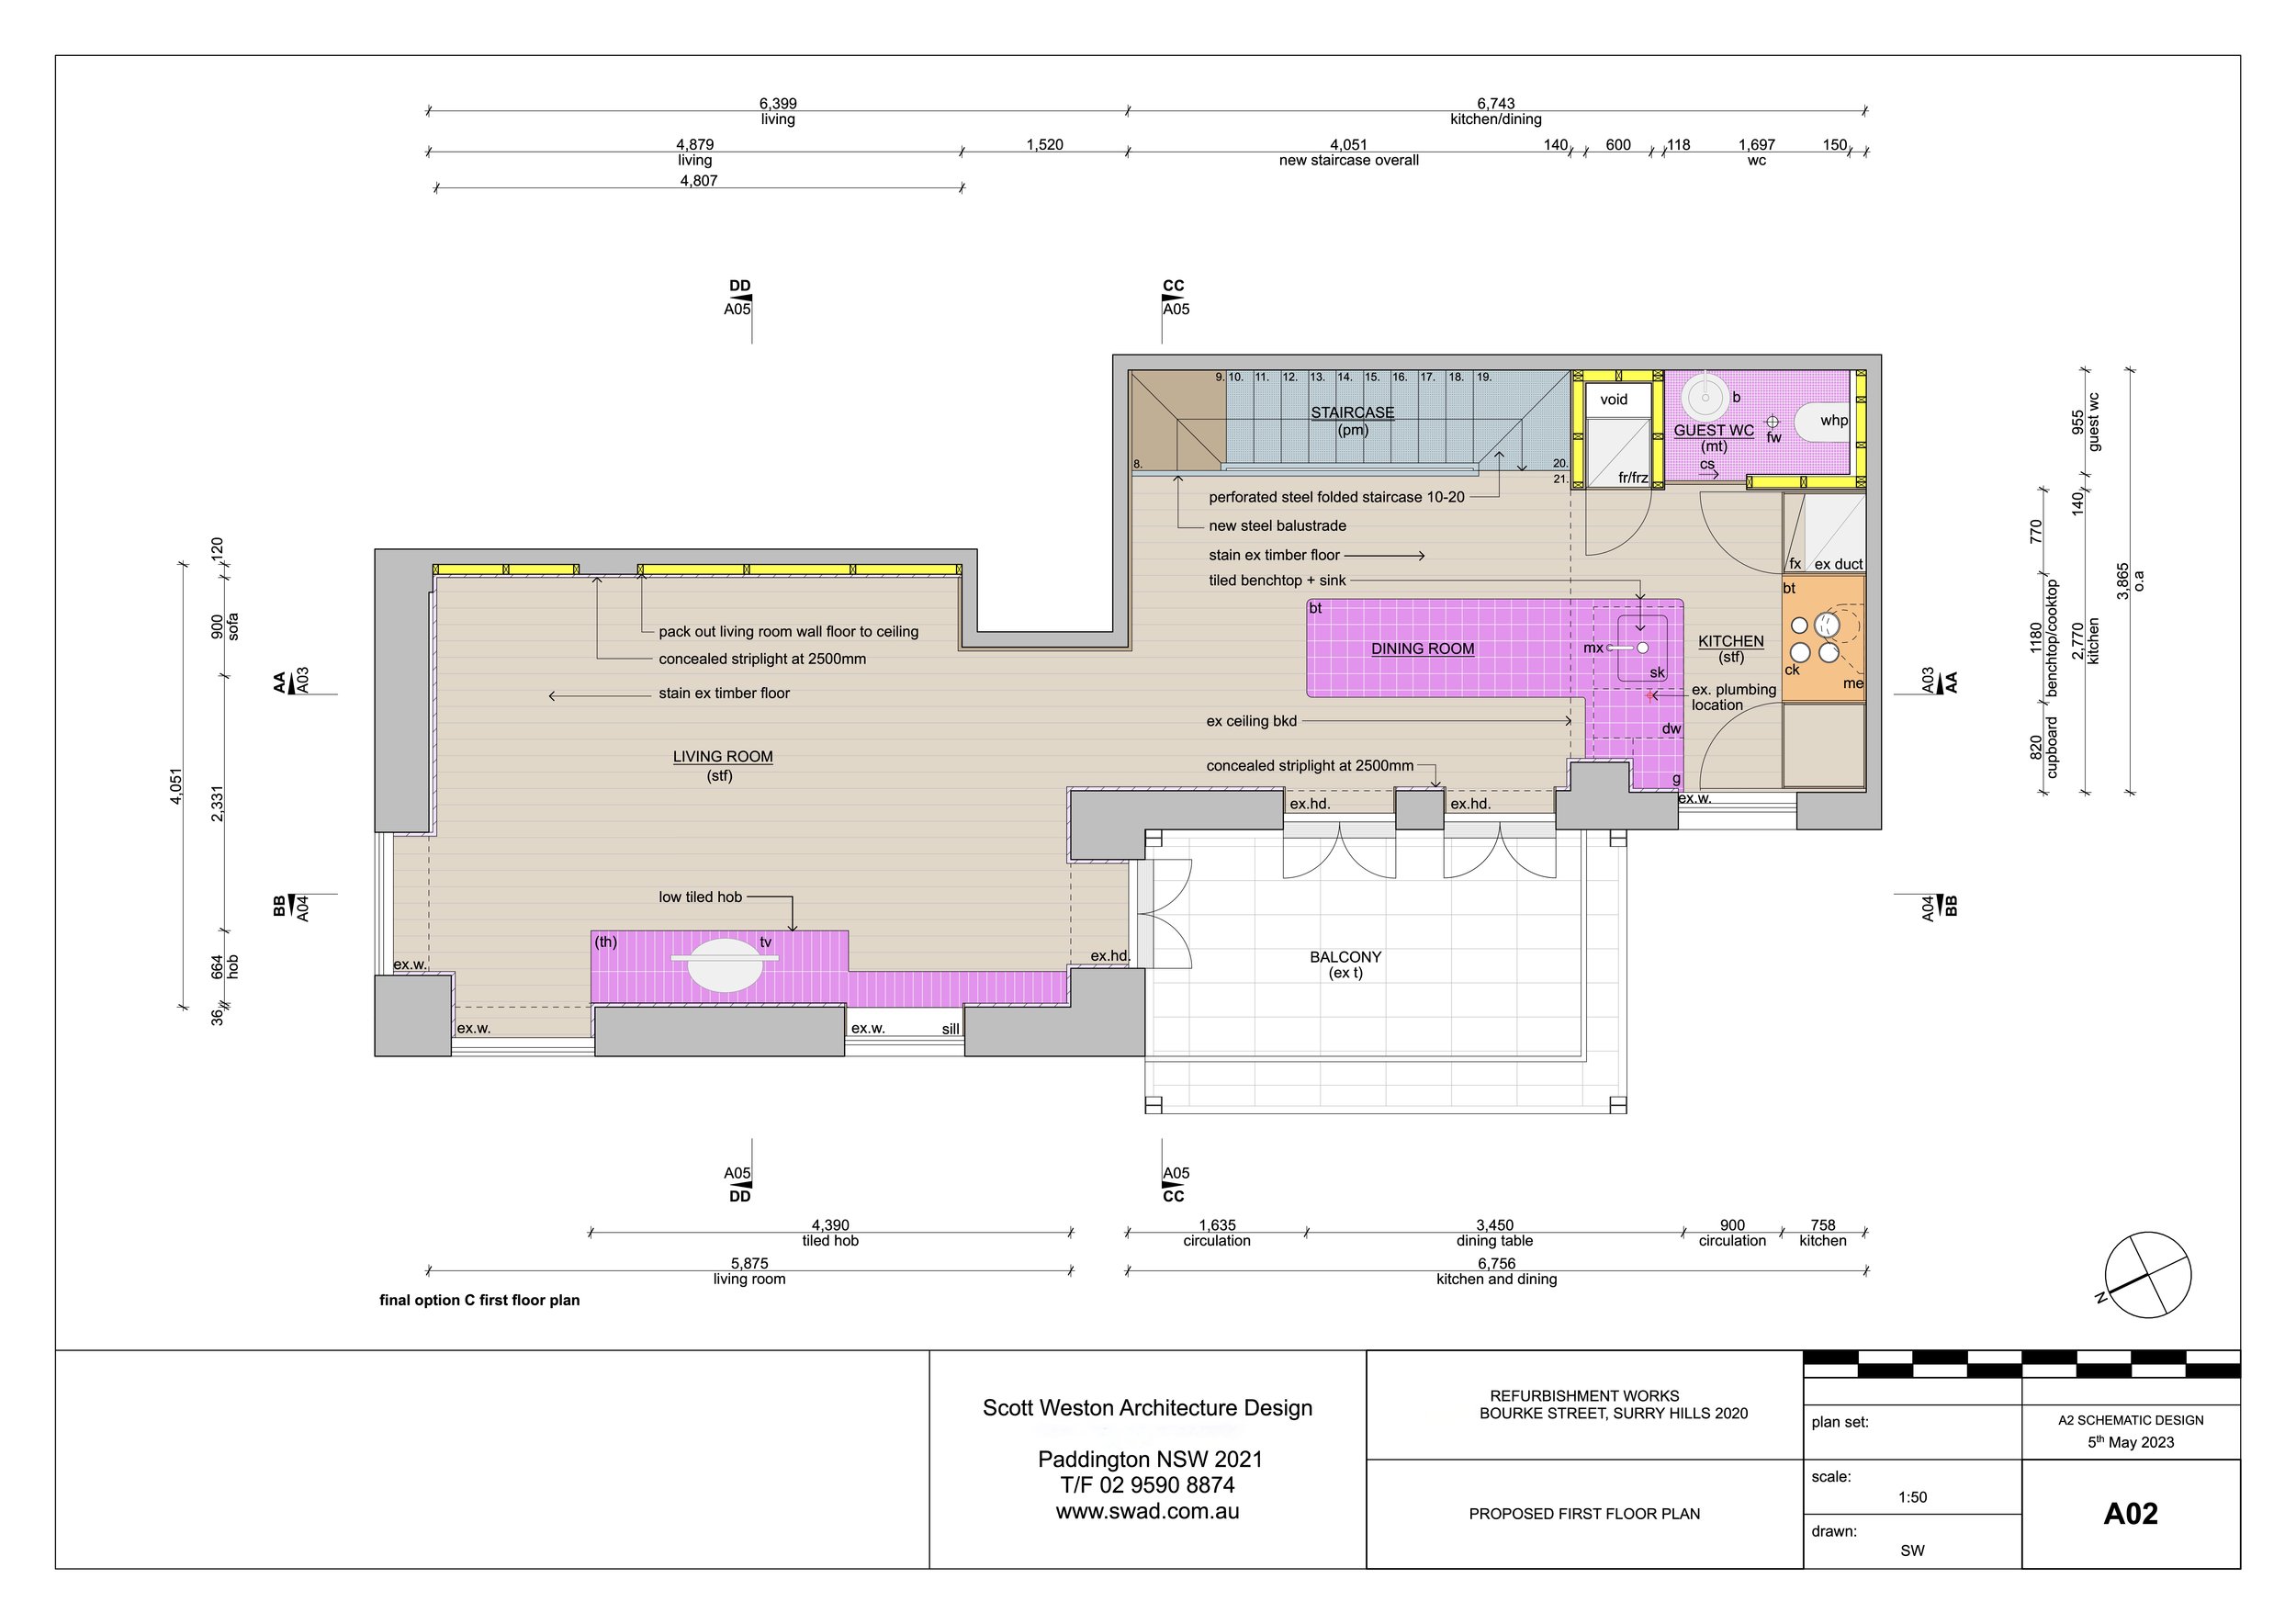 A02 PROPOSED FIRST FLOOR PLAN 2.jpg